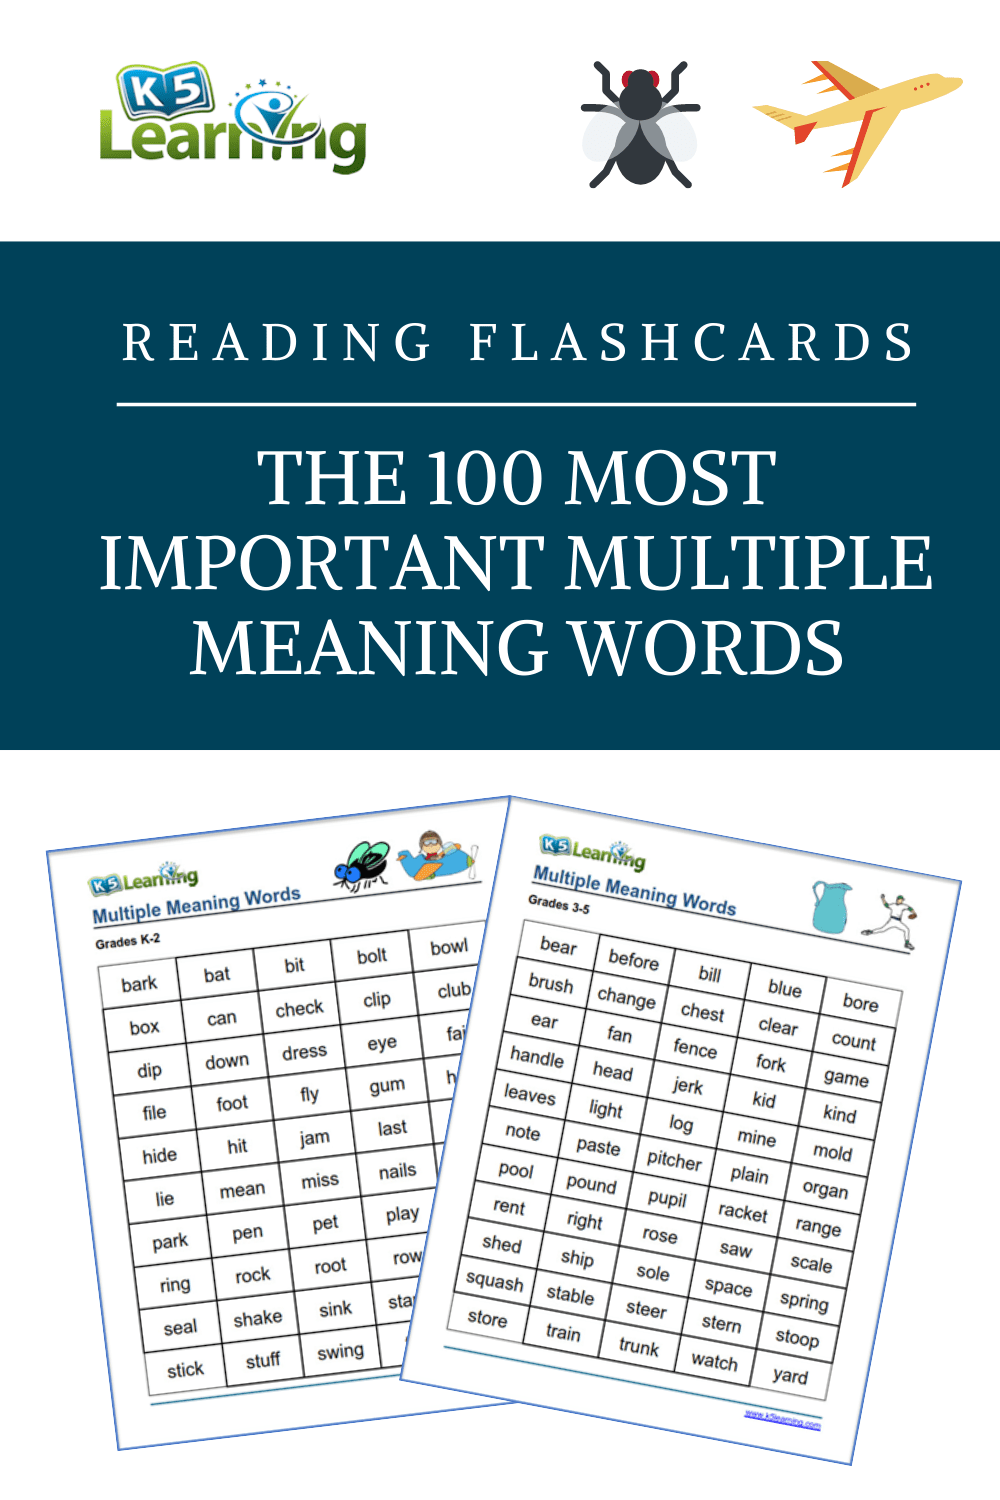 The 100 Most Important Multiple Meaning Words Kids Need to Know | K5